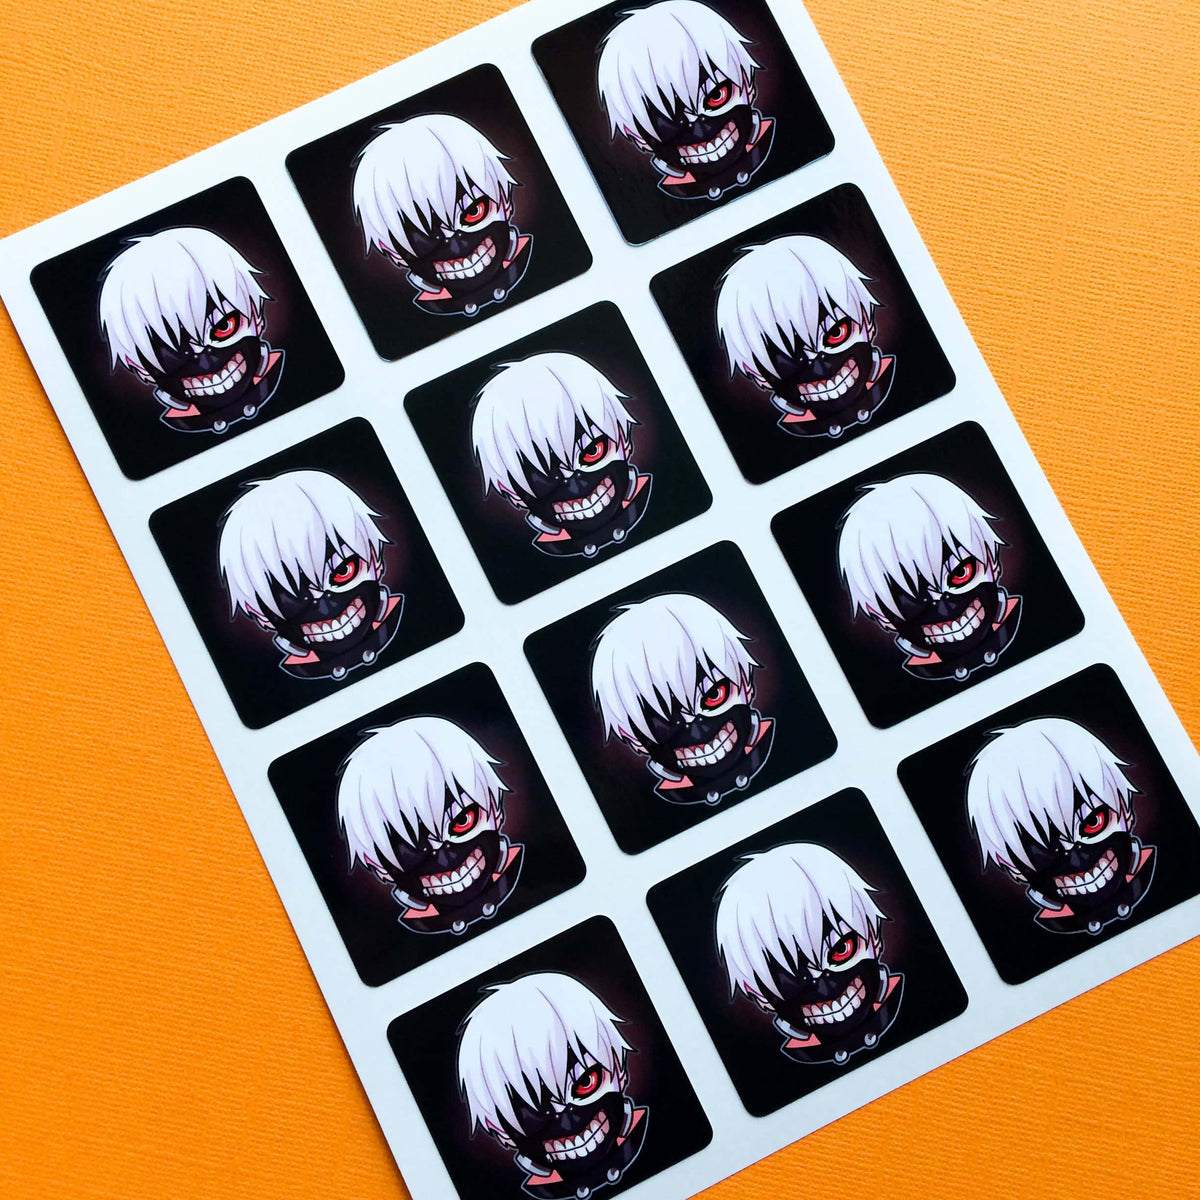 Cool anime character art square sheet label stickers. 